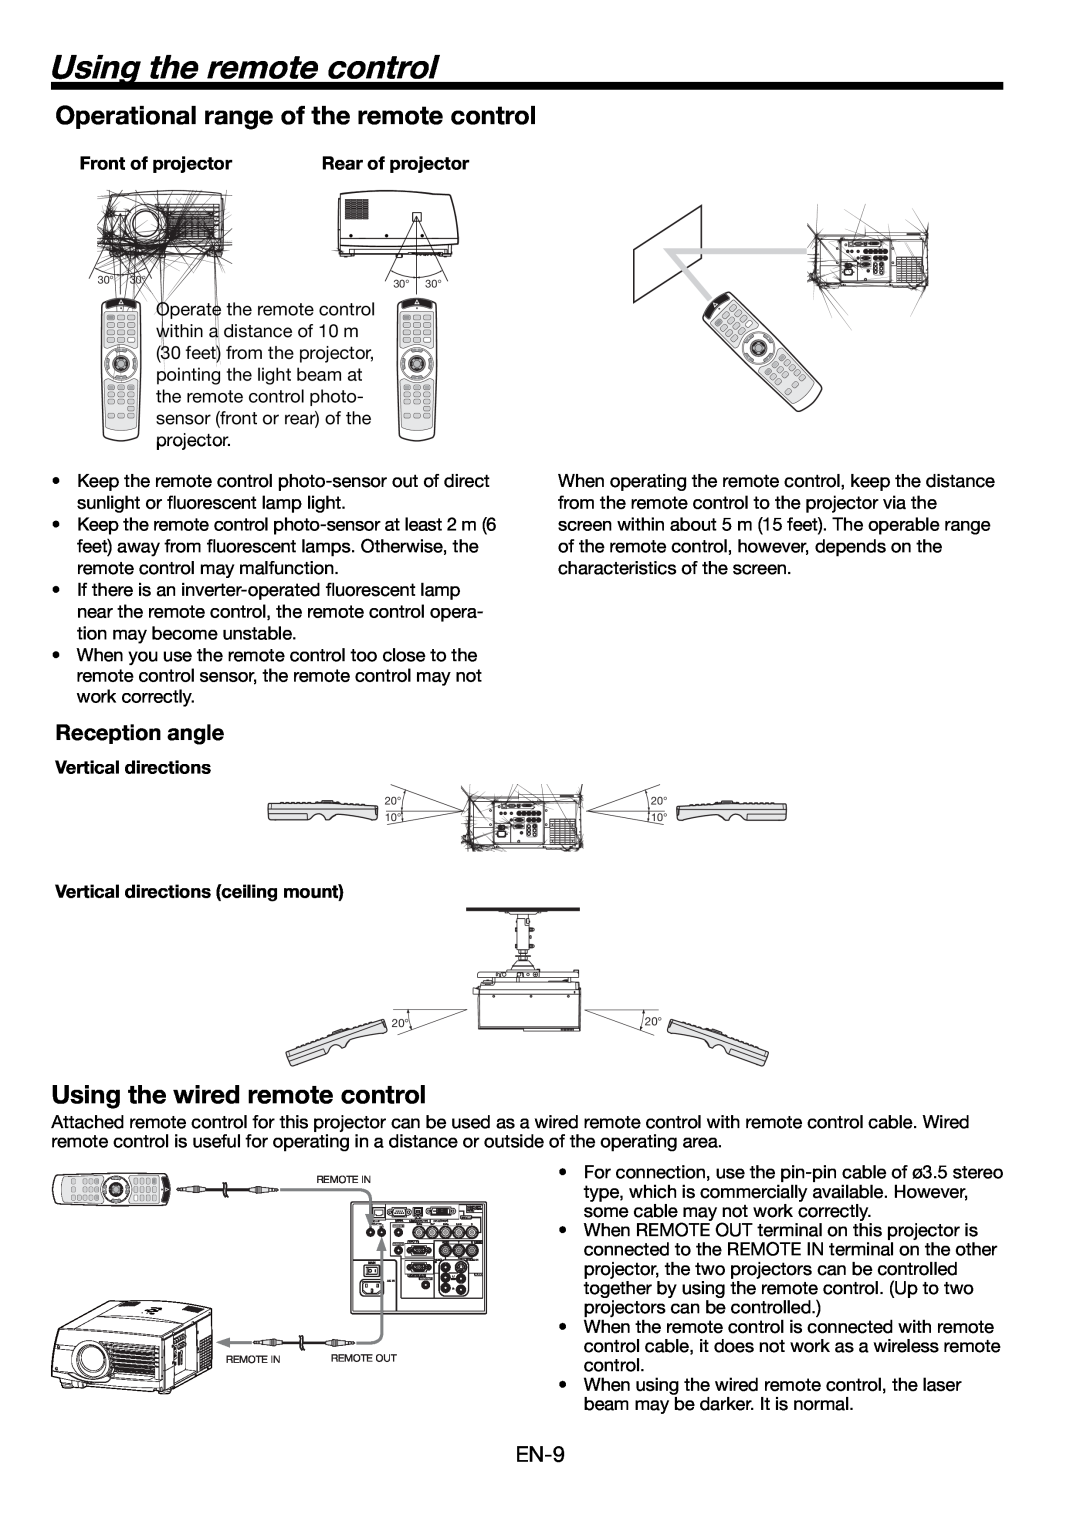 Mitsumi electronic HD8000 user manual Using the remote control, Operational range of the remote control, Reception angle 